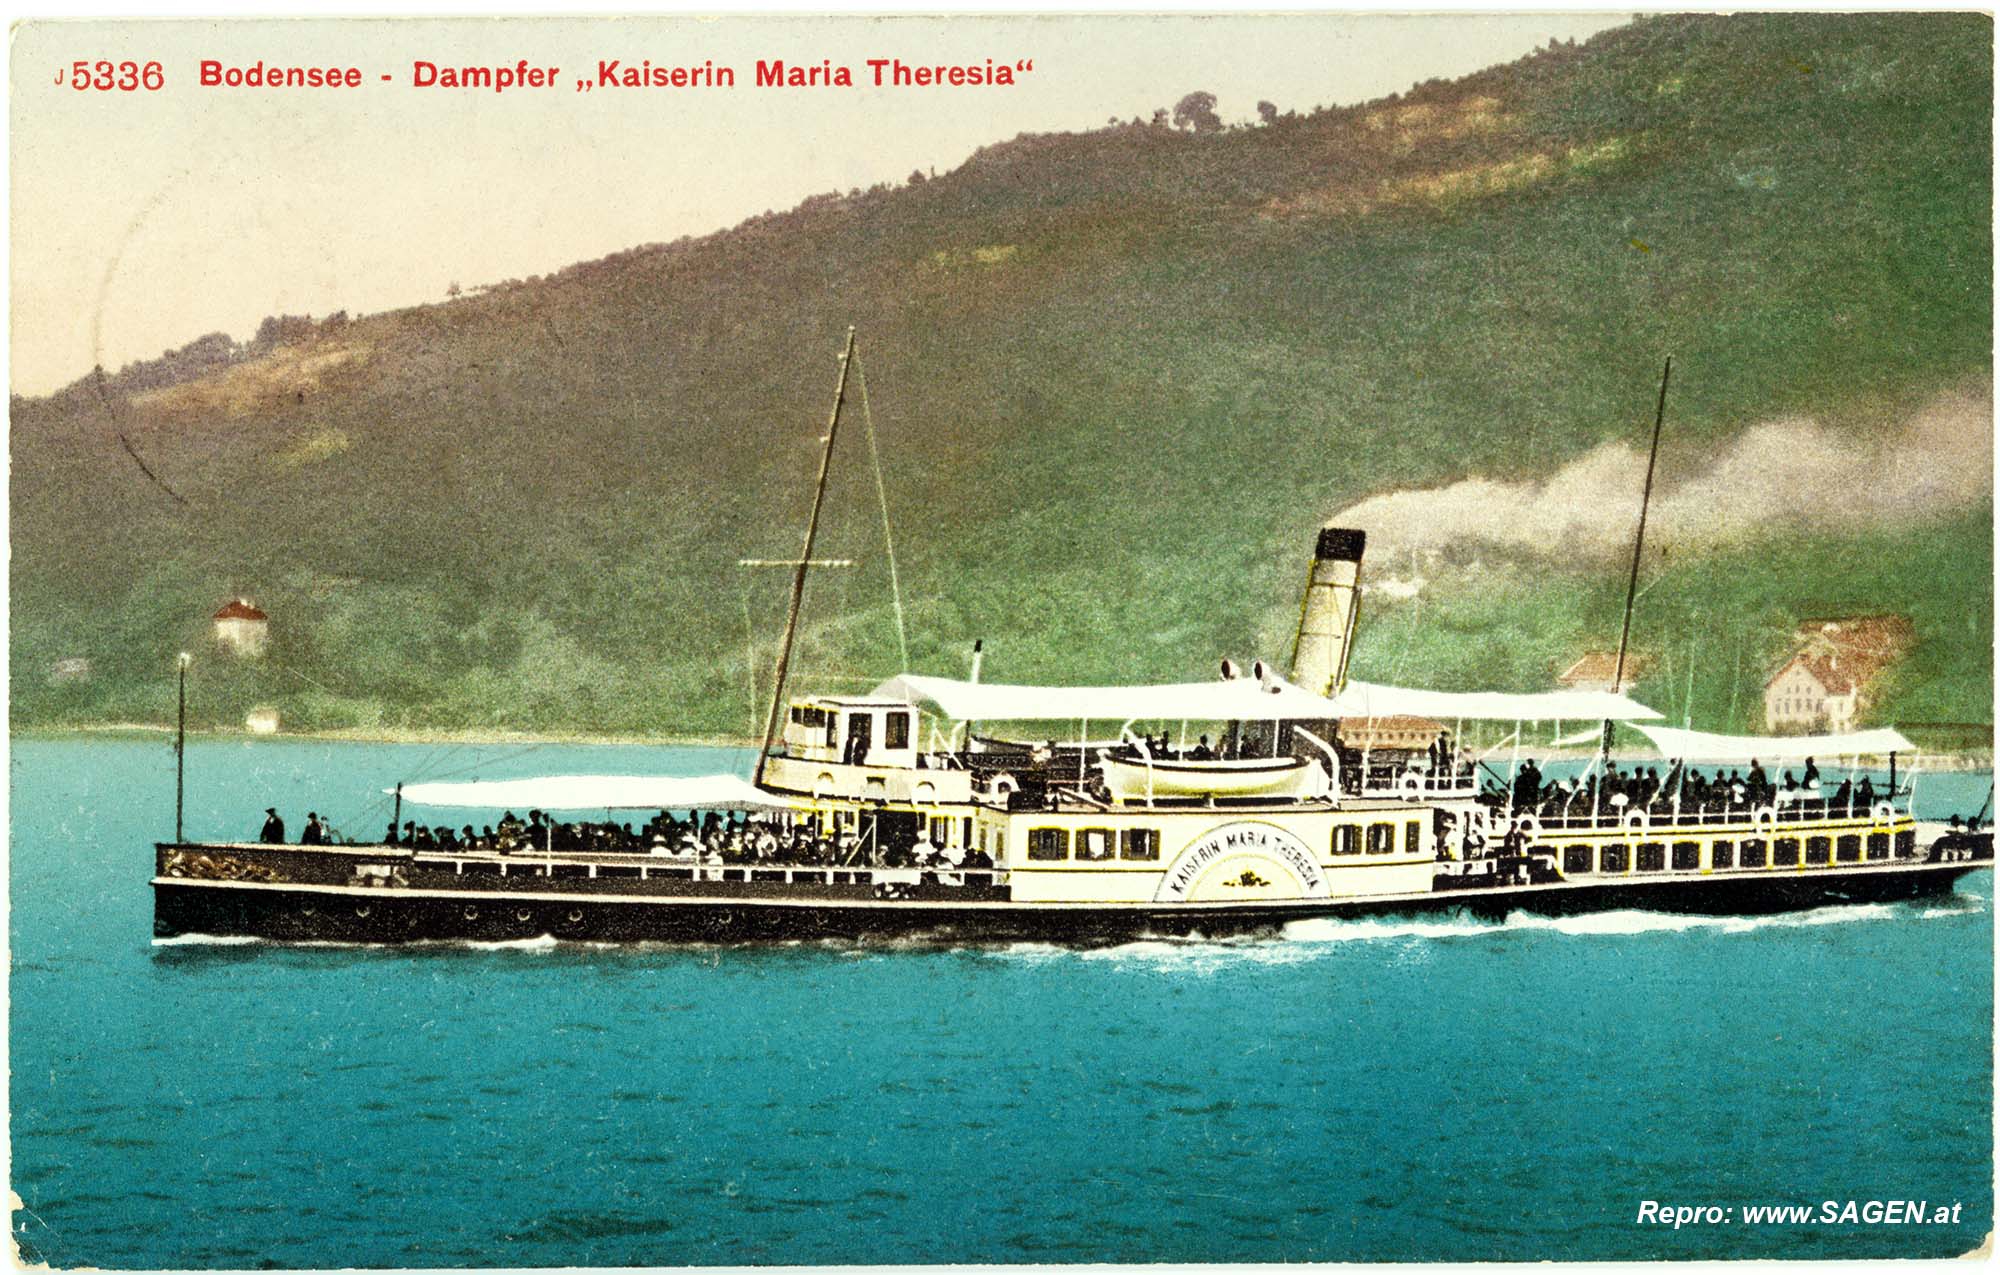 Bodensee, Dampfer "Kaiserin Maria Theresia"